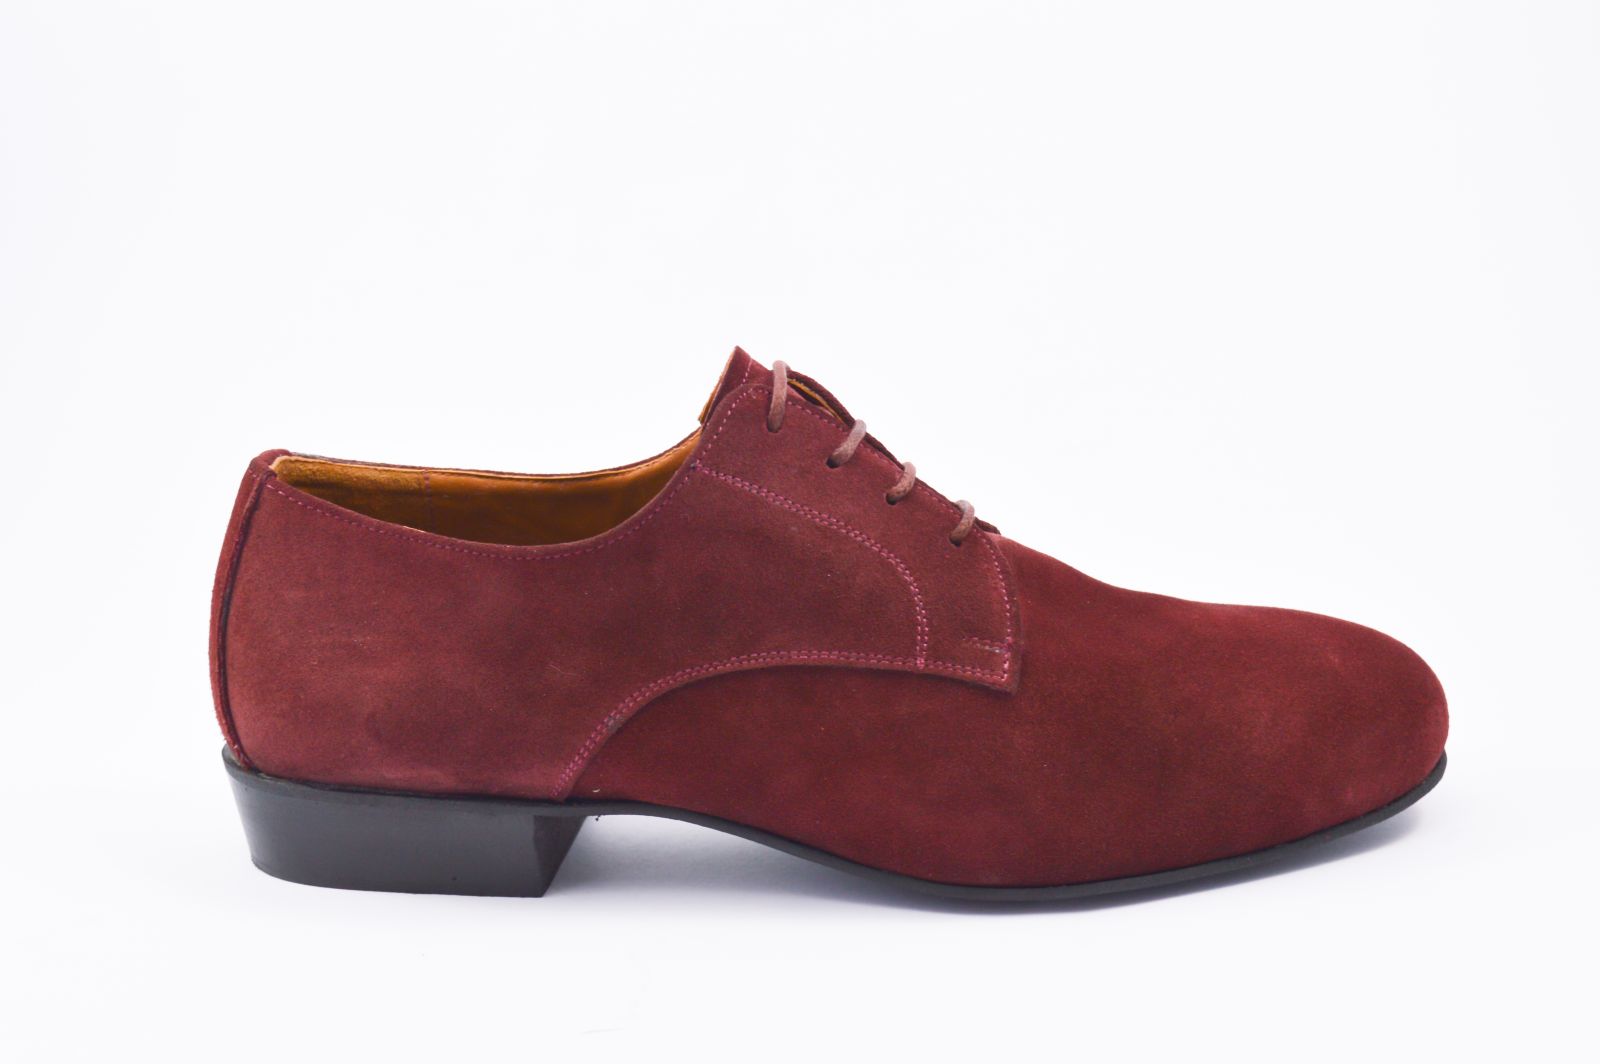 Mens argentine tango dance shoes in burgundy suede leather